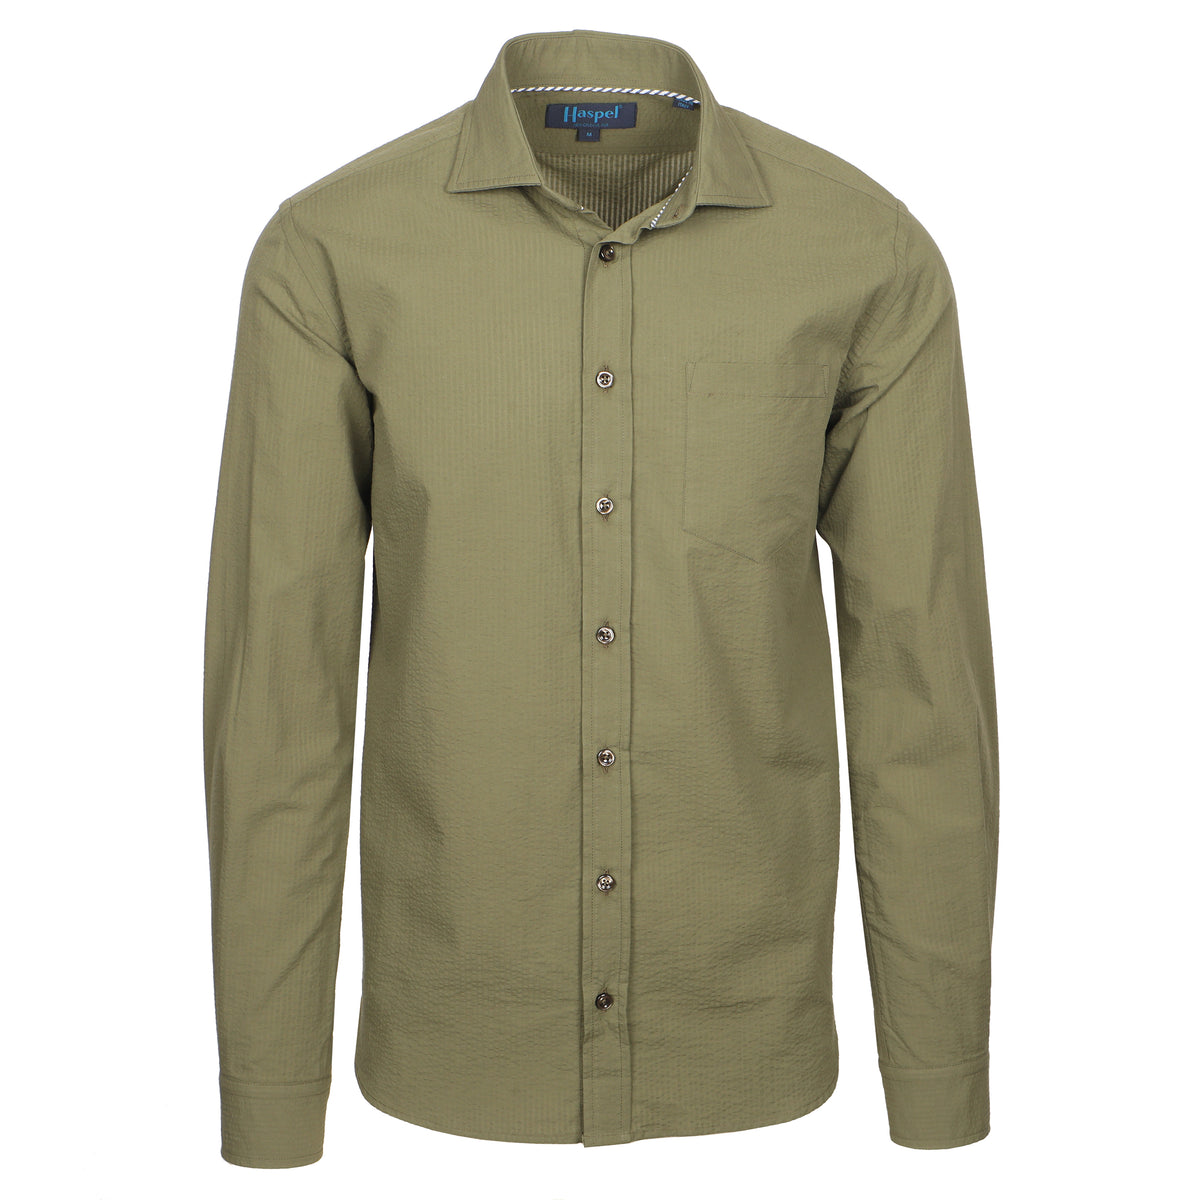 Seersucker all year long in a green olive seersucker shirt. Subtle, lightweight, and a texture they begs a second look.  100% Cotton Seersucker  •  Spread Collar  •  Long Sleeve  •  Chest Pocket  •  Machine Washable  •  Made in Italy